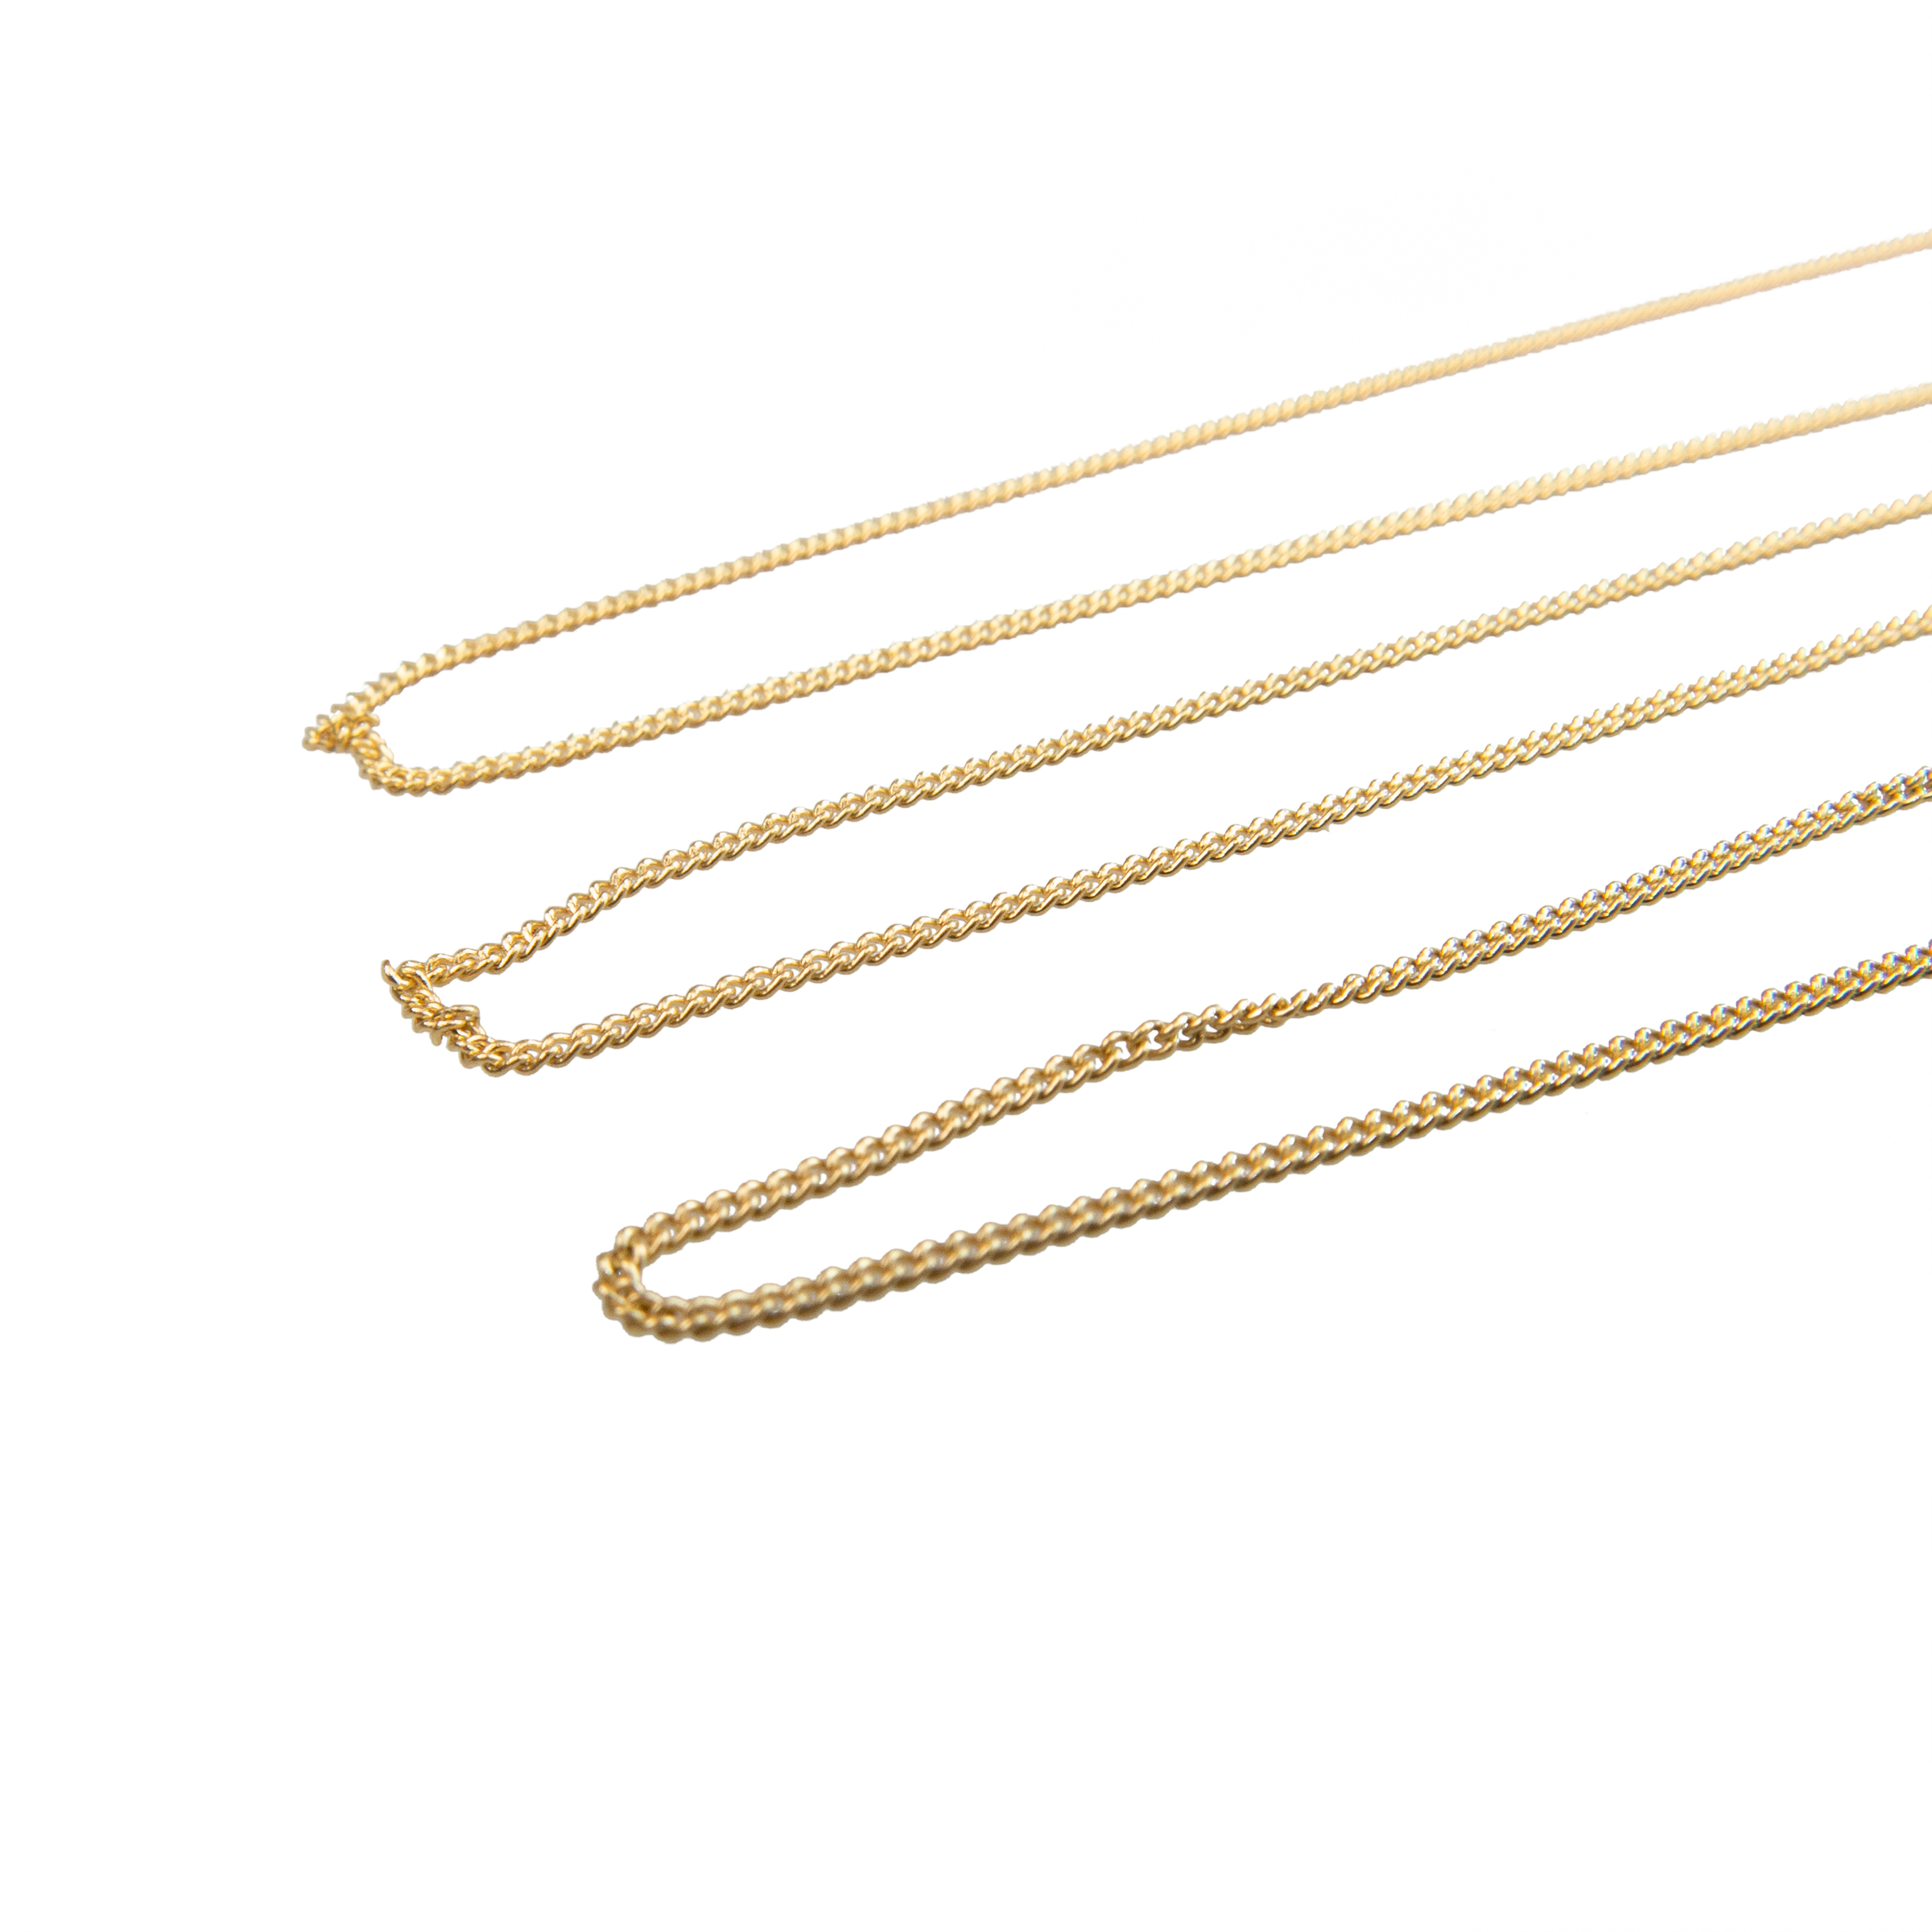 18 x 18k Yellow Gold Chains